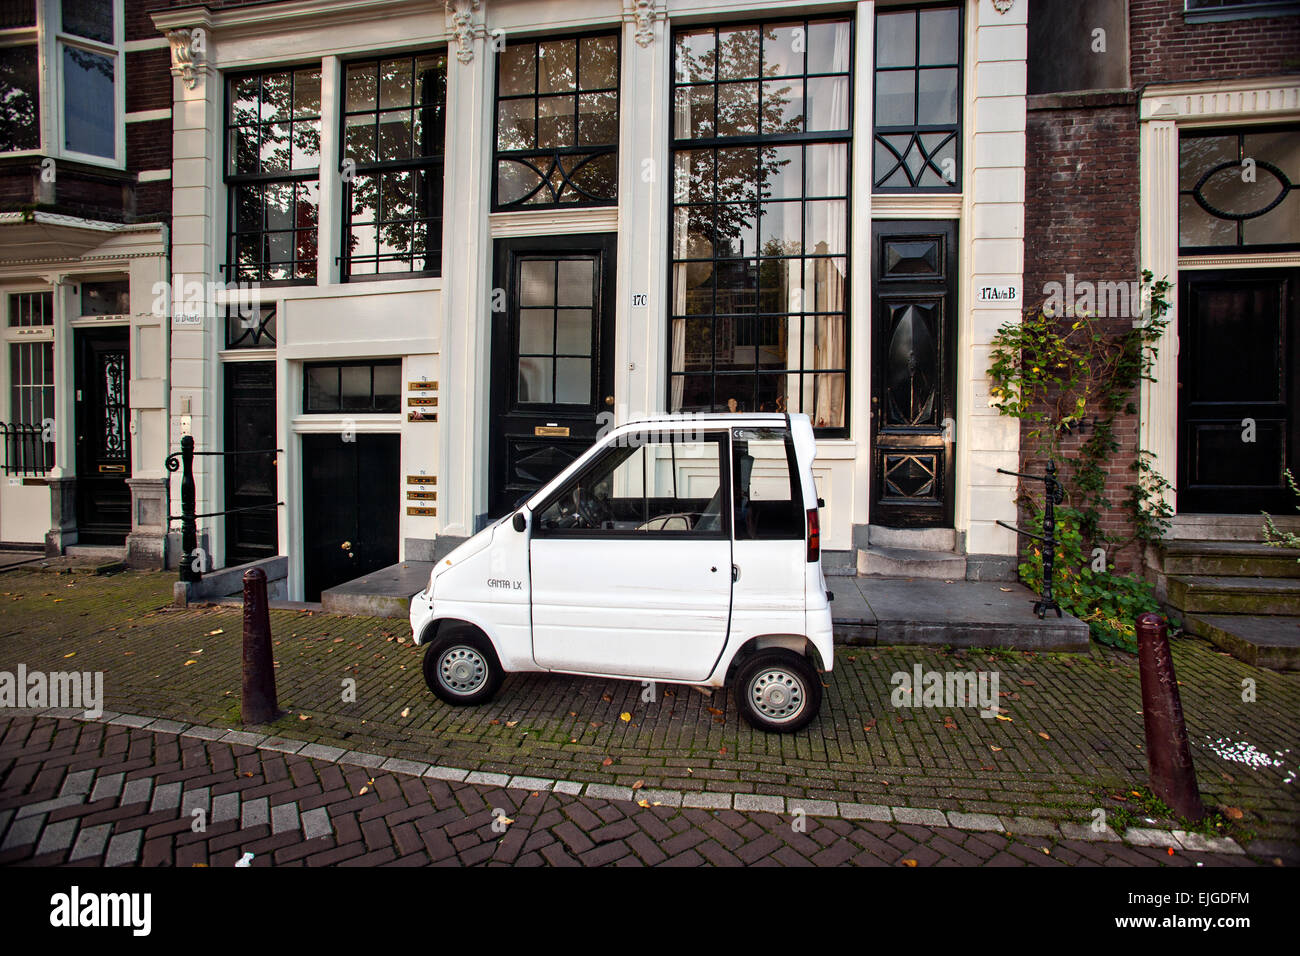 A Canta LX two-seat microcar created for disabled drivers parked along a street in Amsterdam. Stock Photo